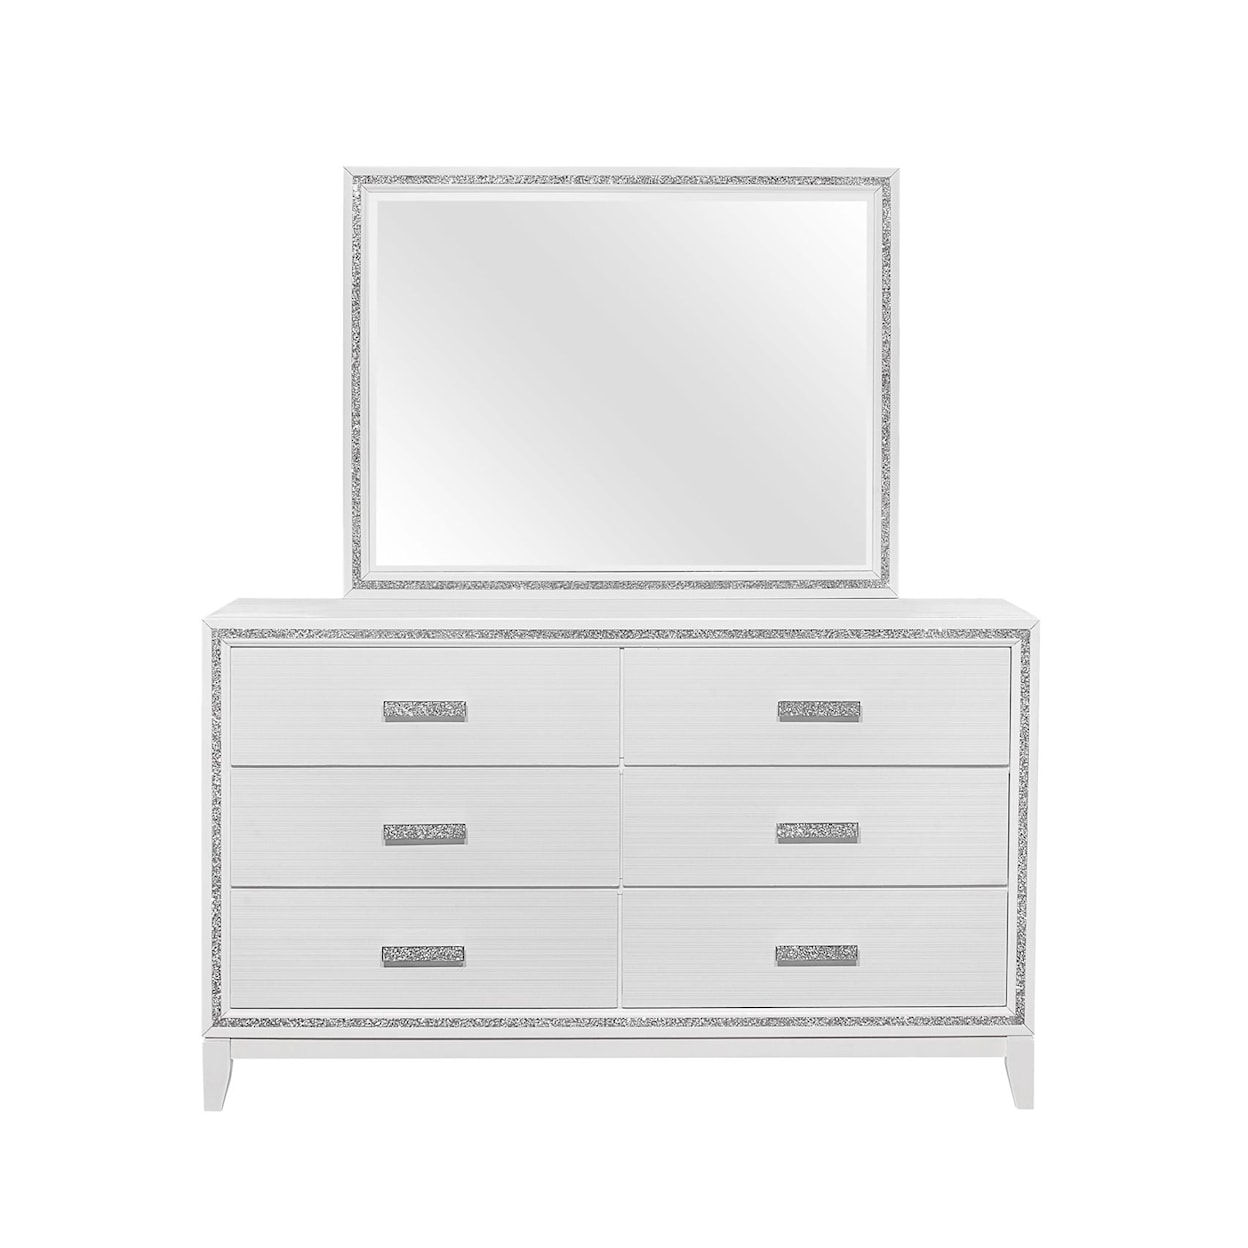 Global Furniture Lily Dresser Mirror with Crystal Mirror Trim